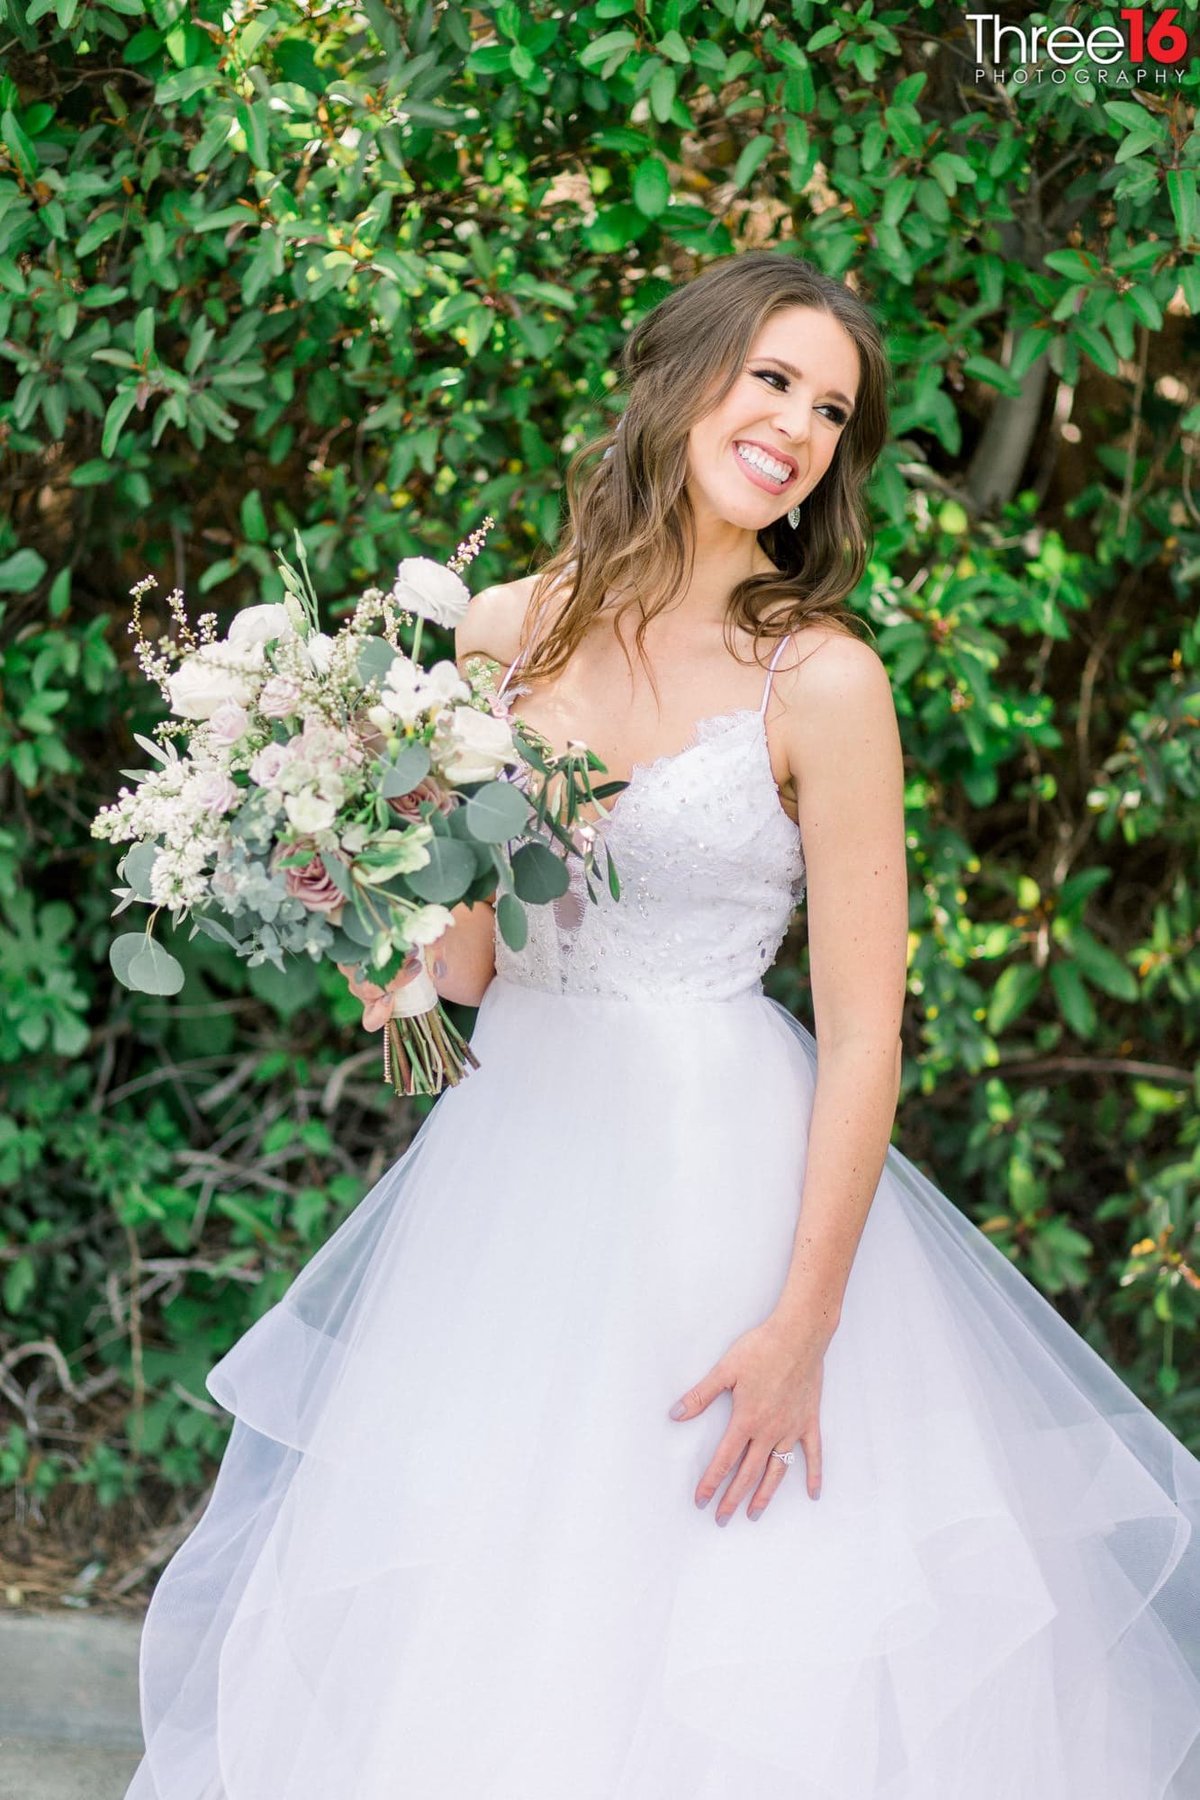 Bride smiles during photo session